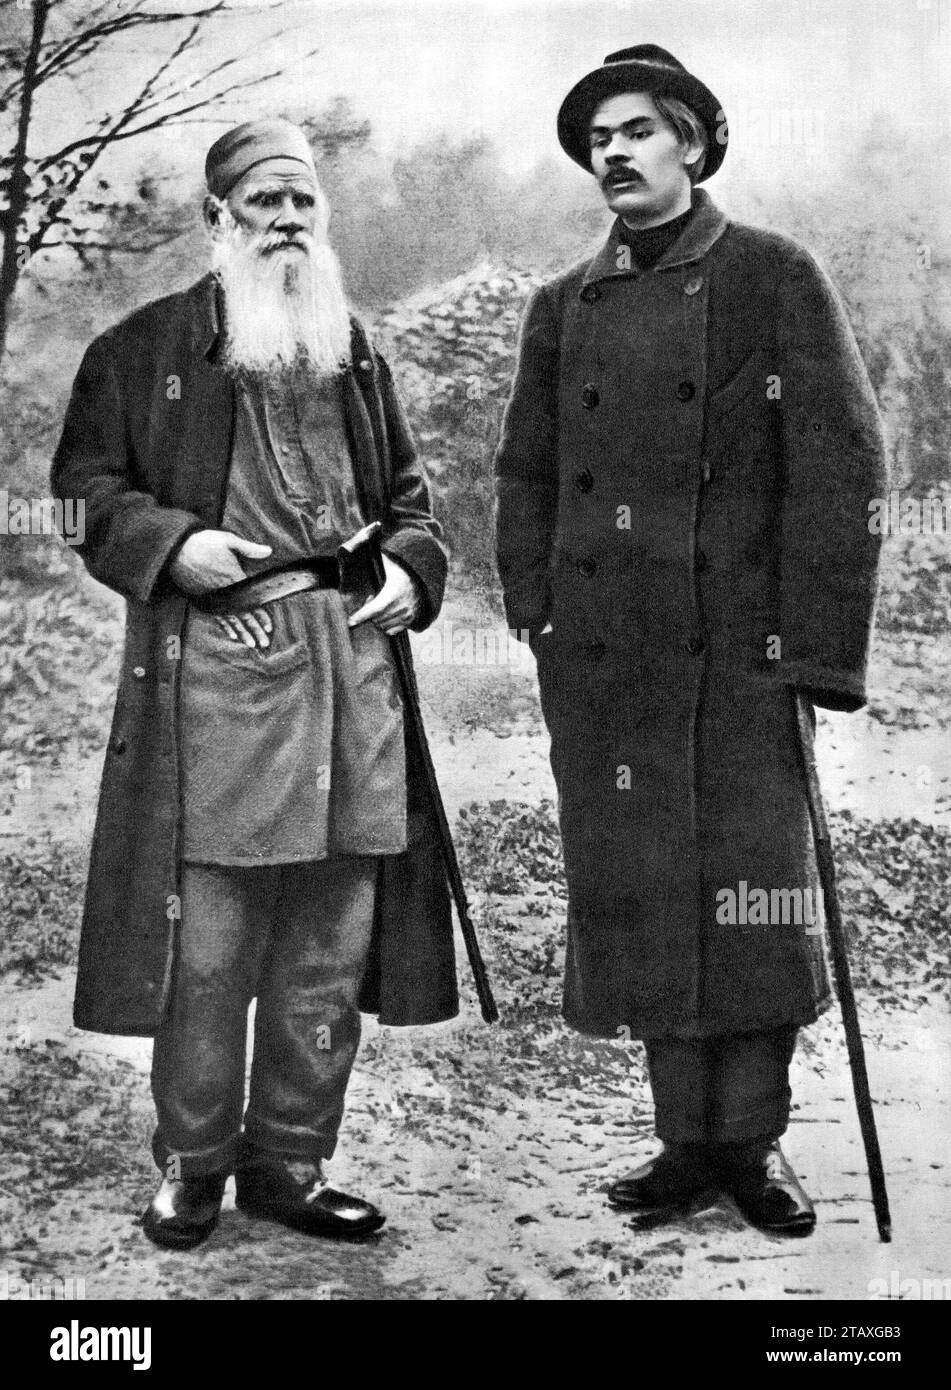 Leo Tolstoy and Maxim Gorky. Portrait of the Russian writers Count Lev Nikolayevich Tolstoy (1828-1910)  and Alexei Maximovich Peshkov (1868-1936) in Yasnaya Polyana, 1900 Stock Photo